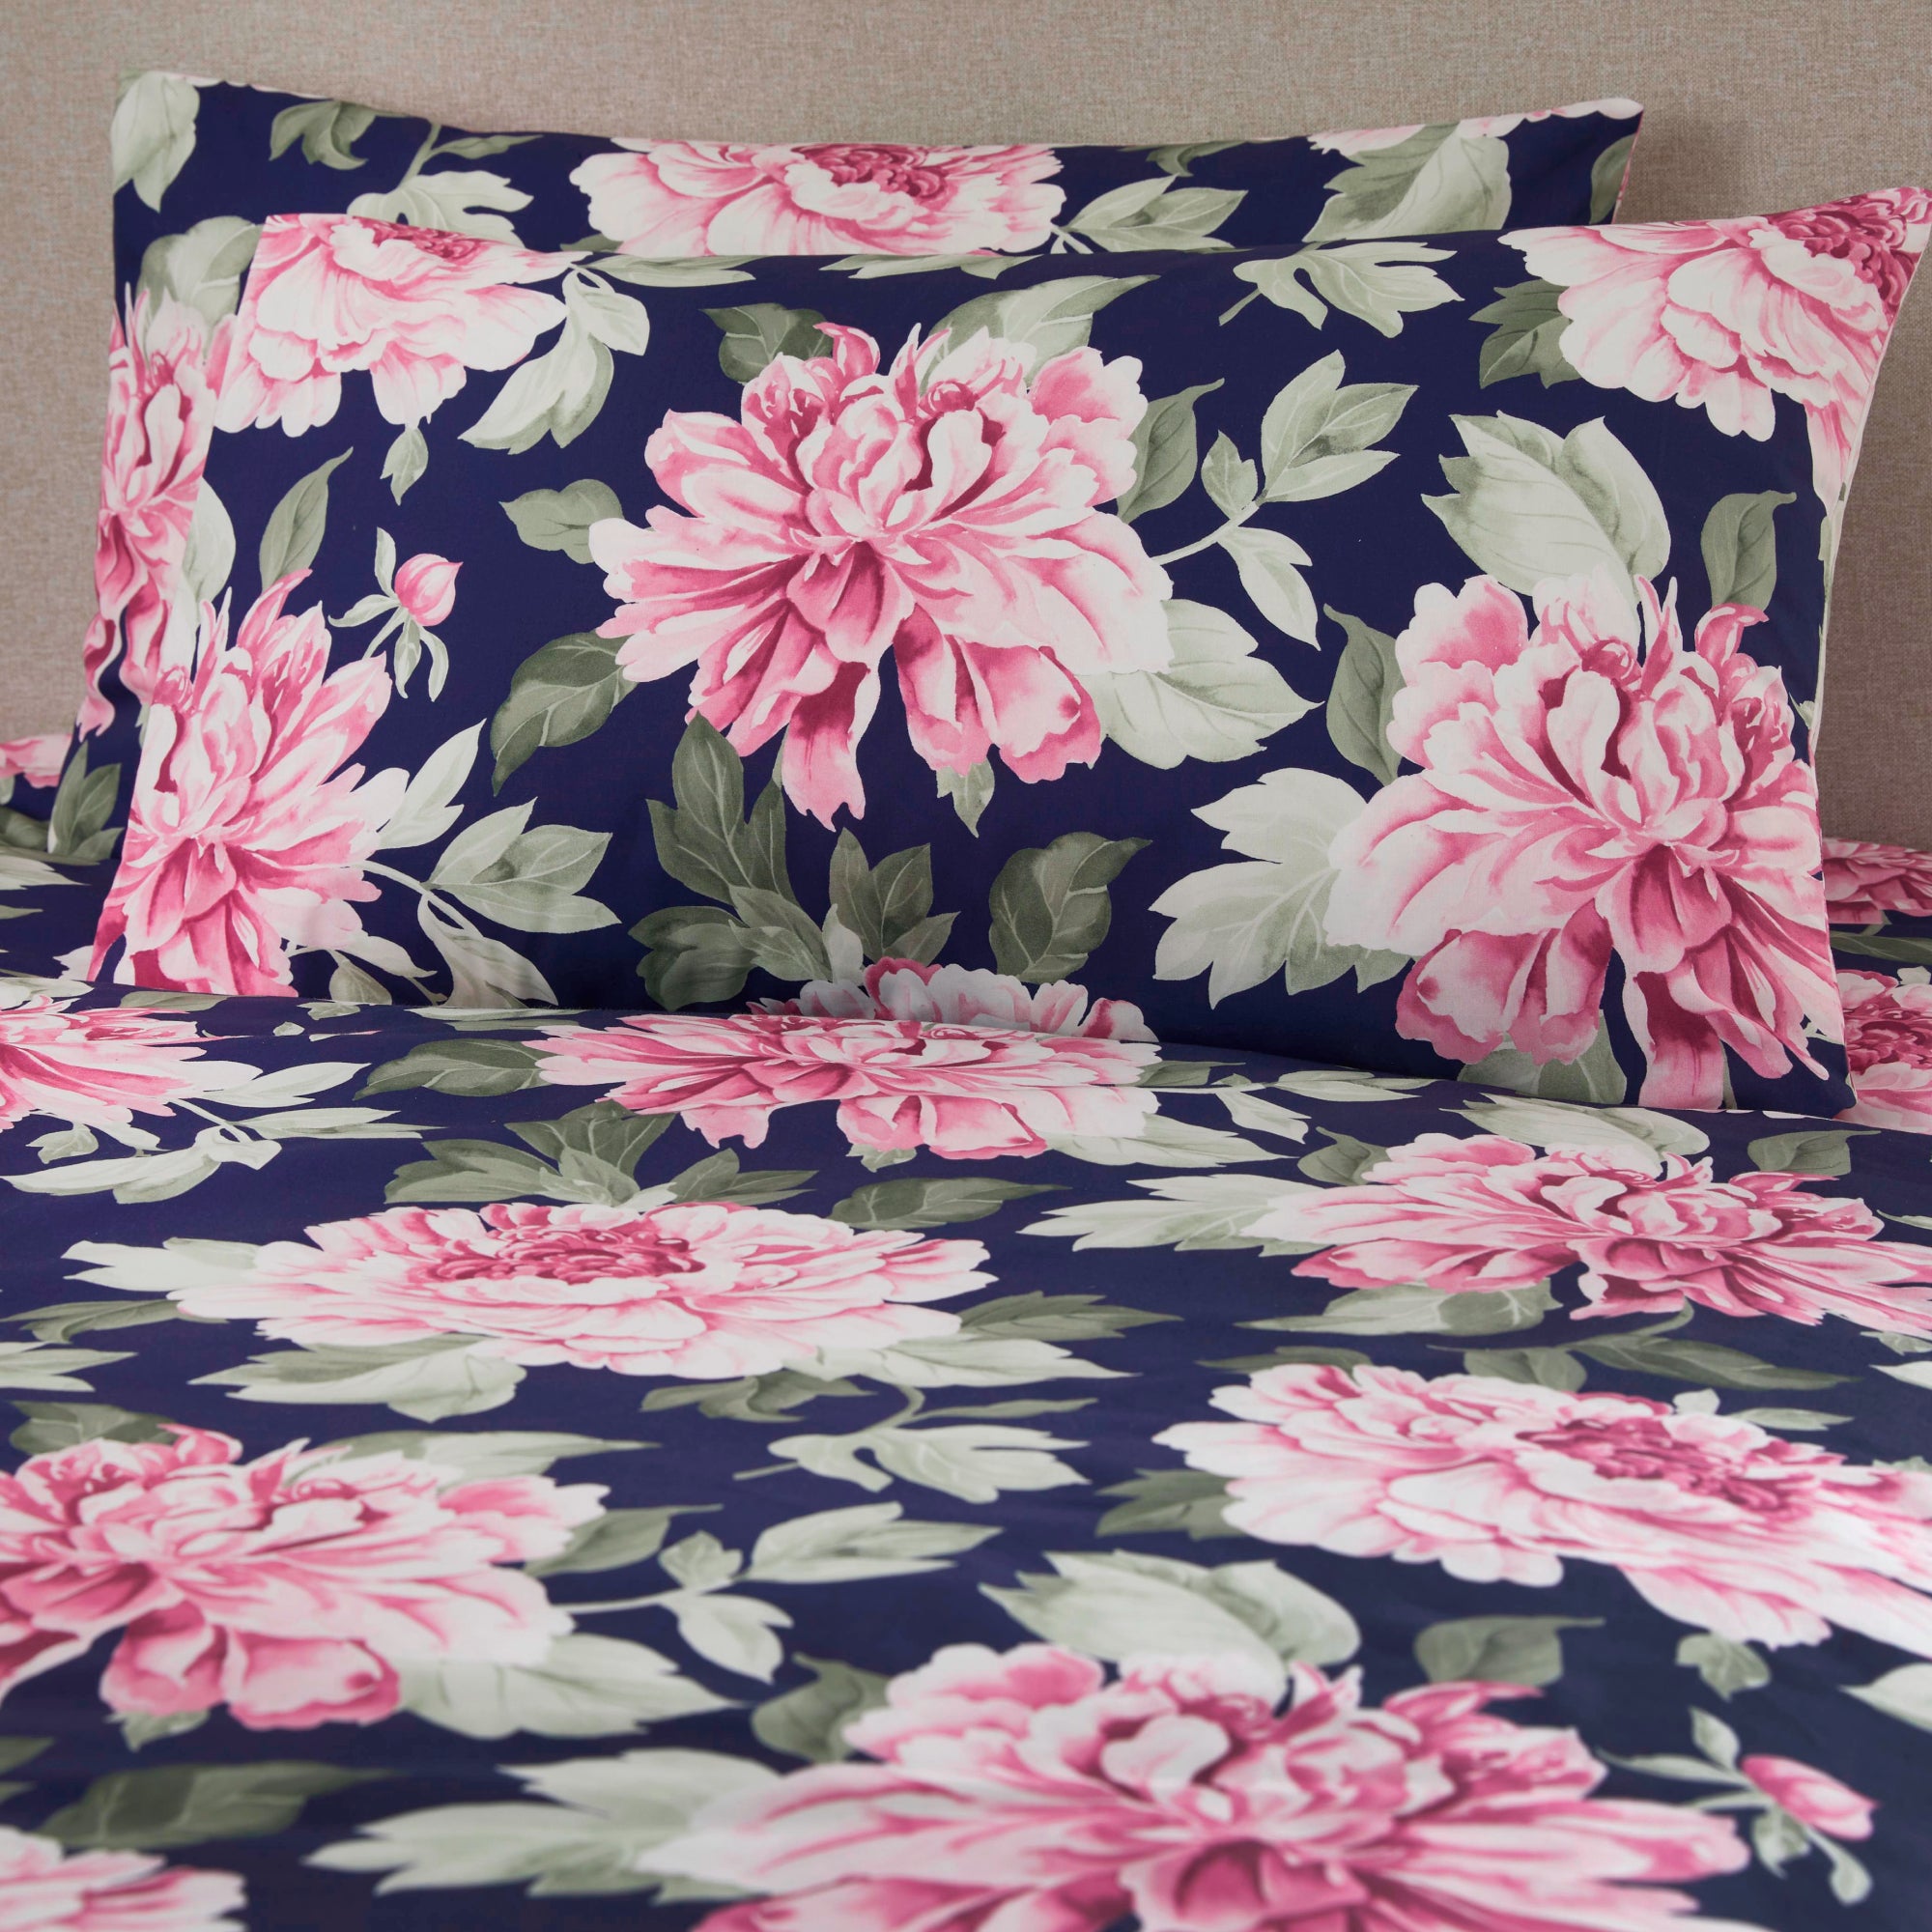 Duvet Cover Set Kirsten by Dreams And Drapes Design in Pink/Blue